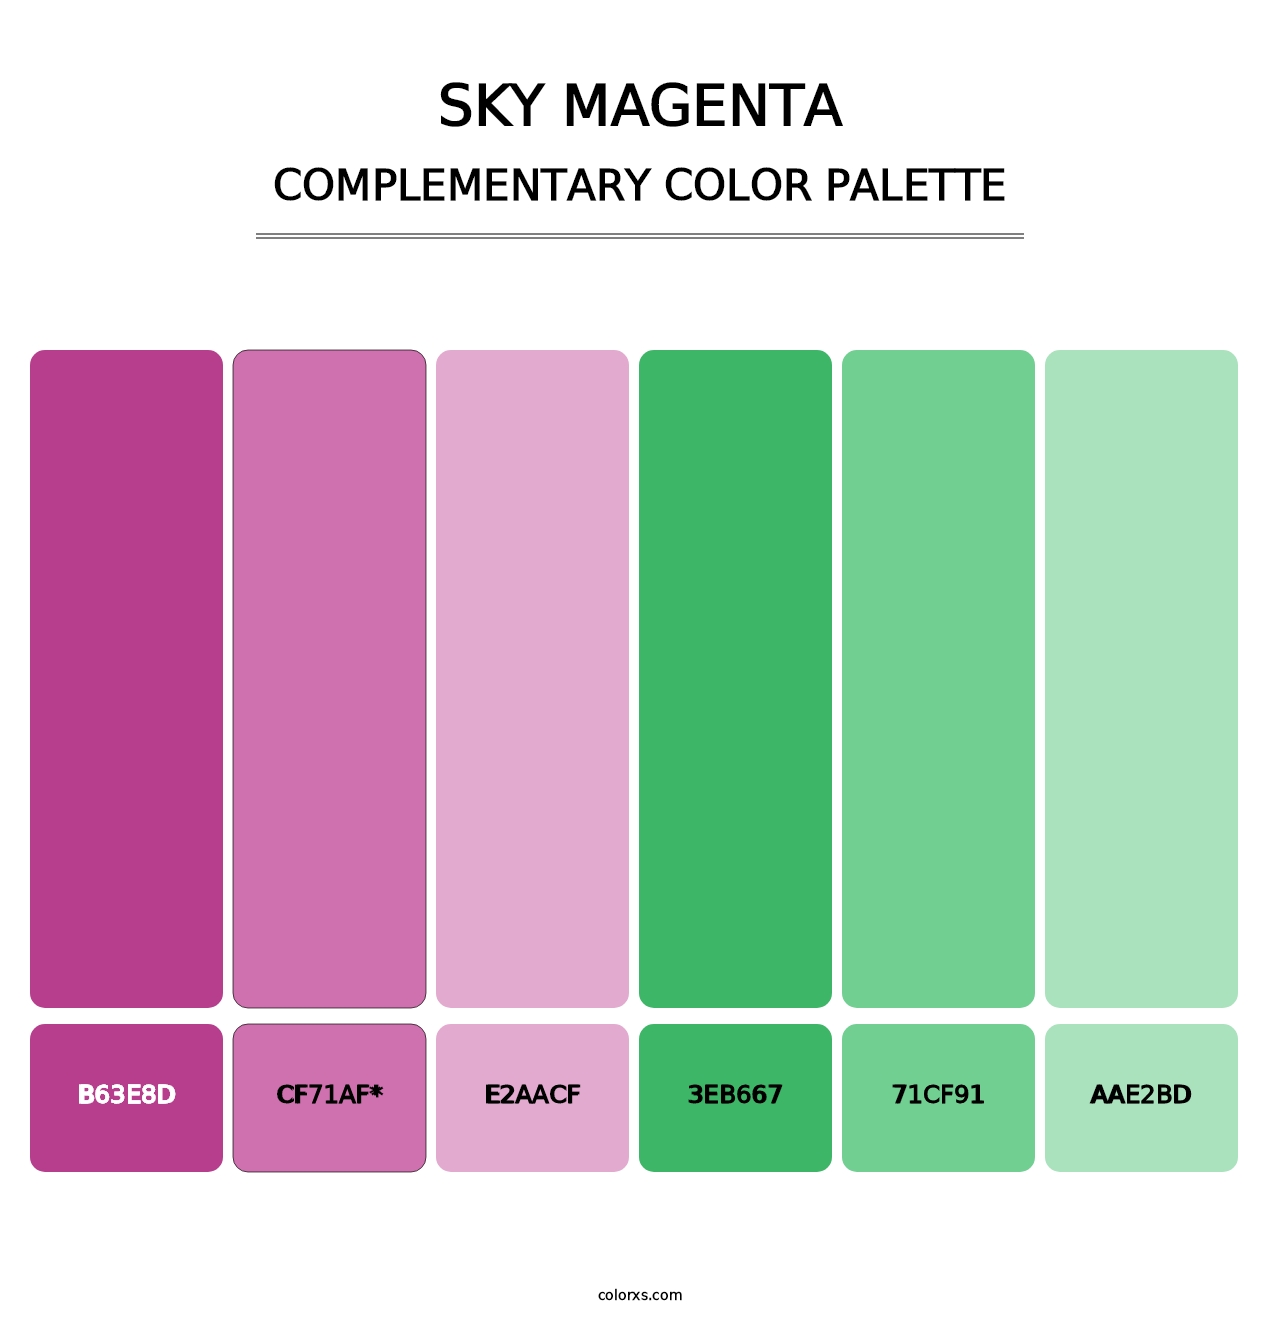 Sky Magenta - Complementary Color Palette